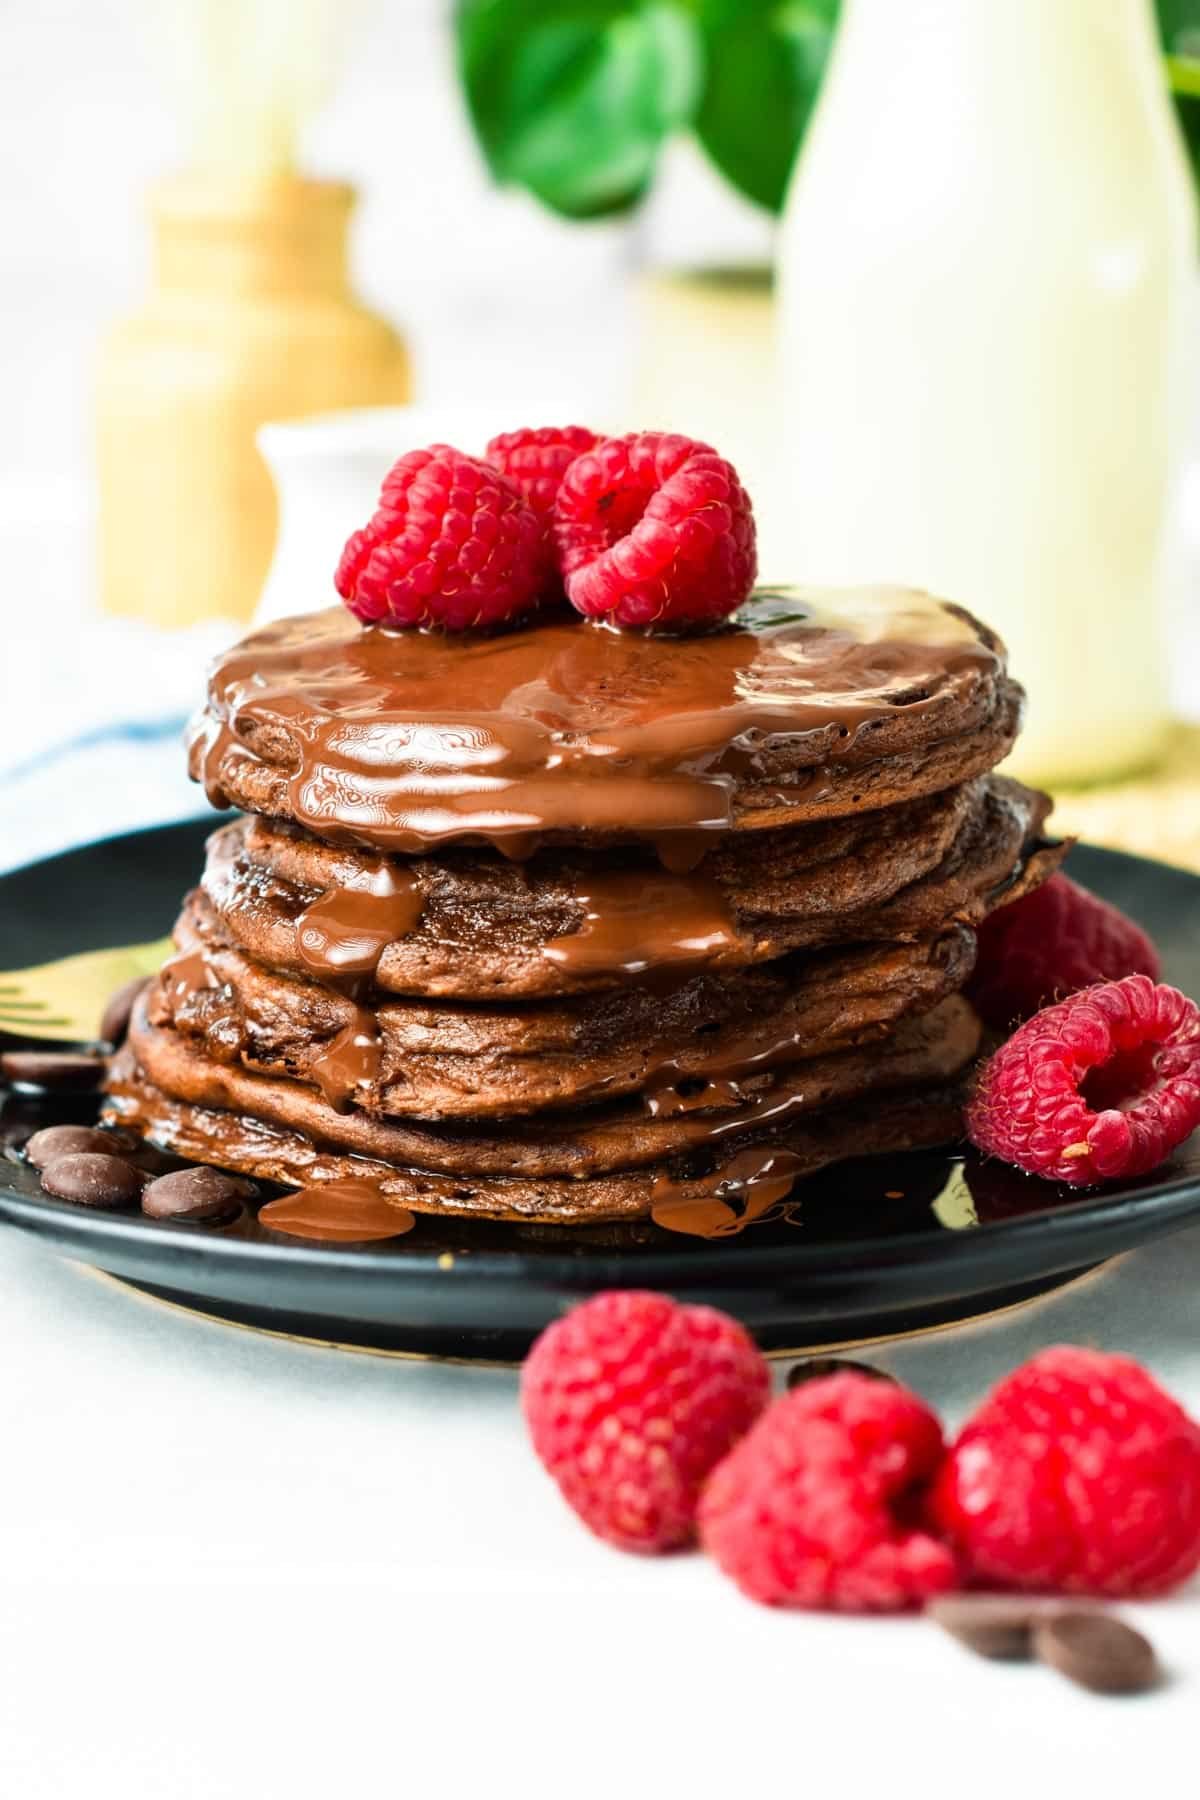 A stack of Chocolate Protein Pancakes with chocolate sauce on top and fresh raspberries.